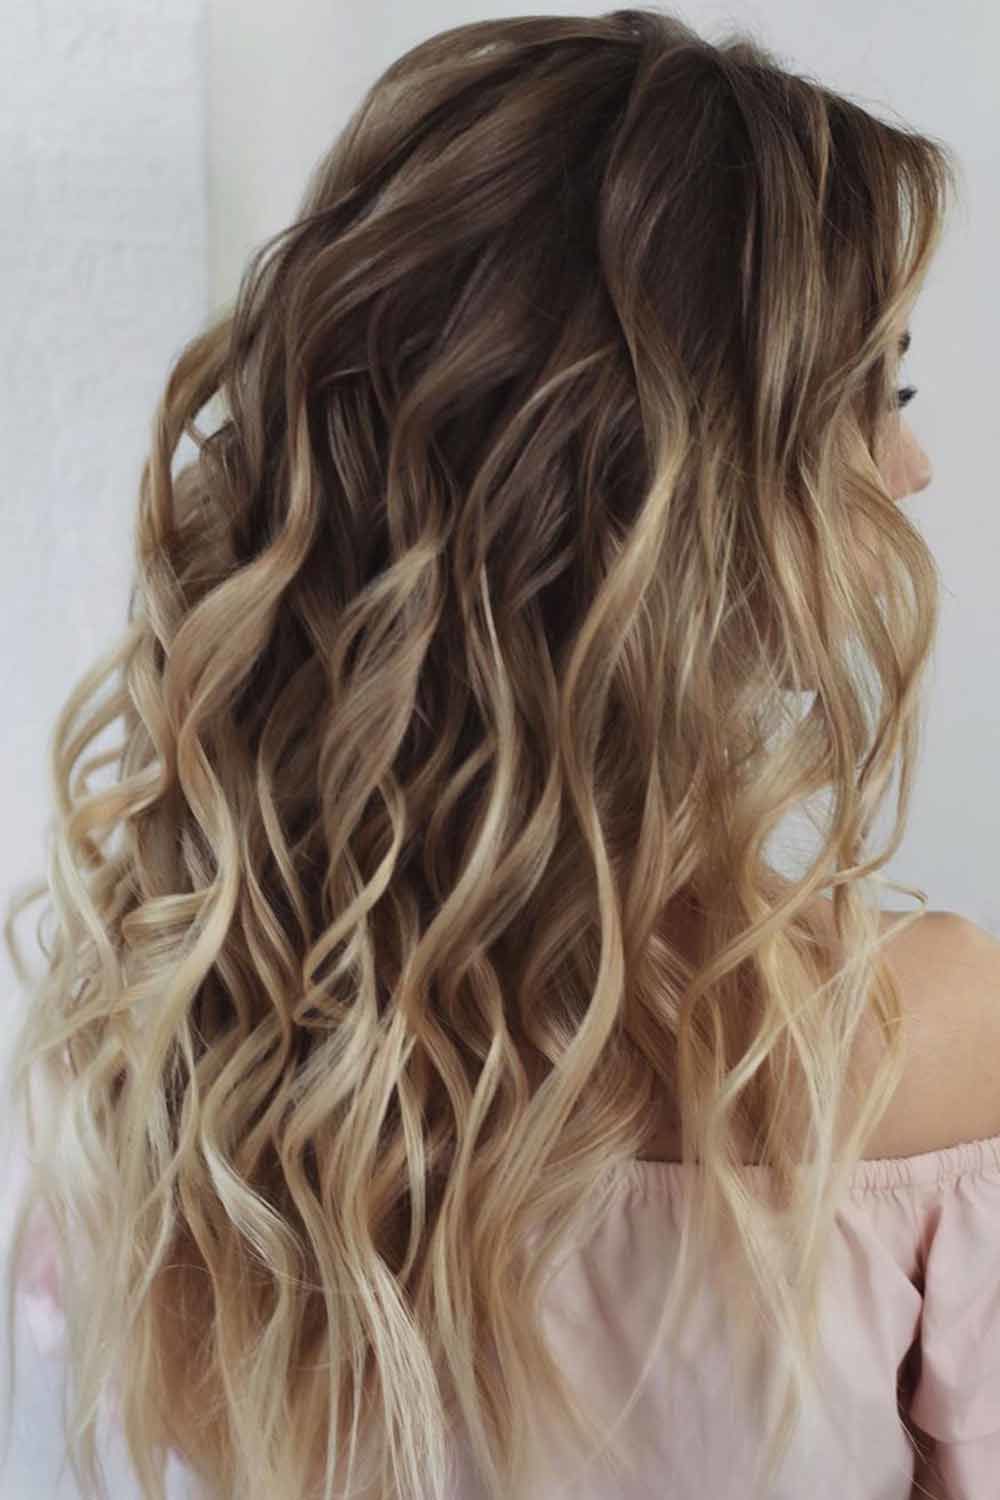 Honey + Coffee Coloring #coolhairstyle #ombre